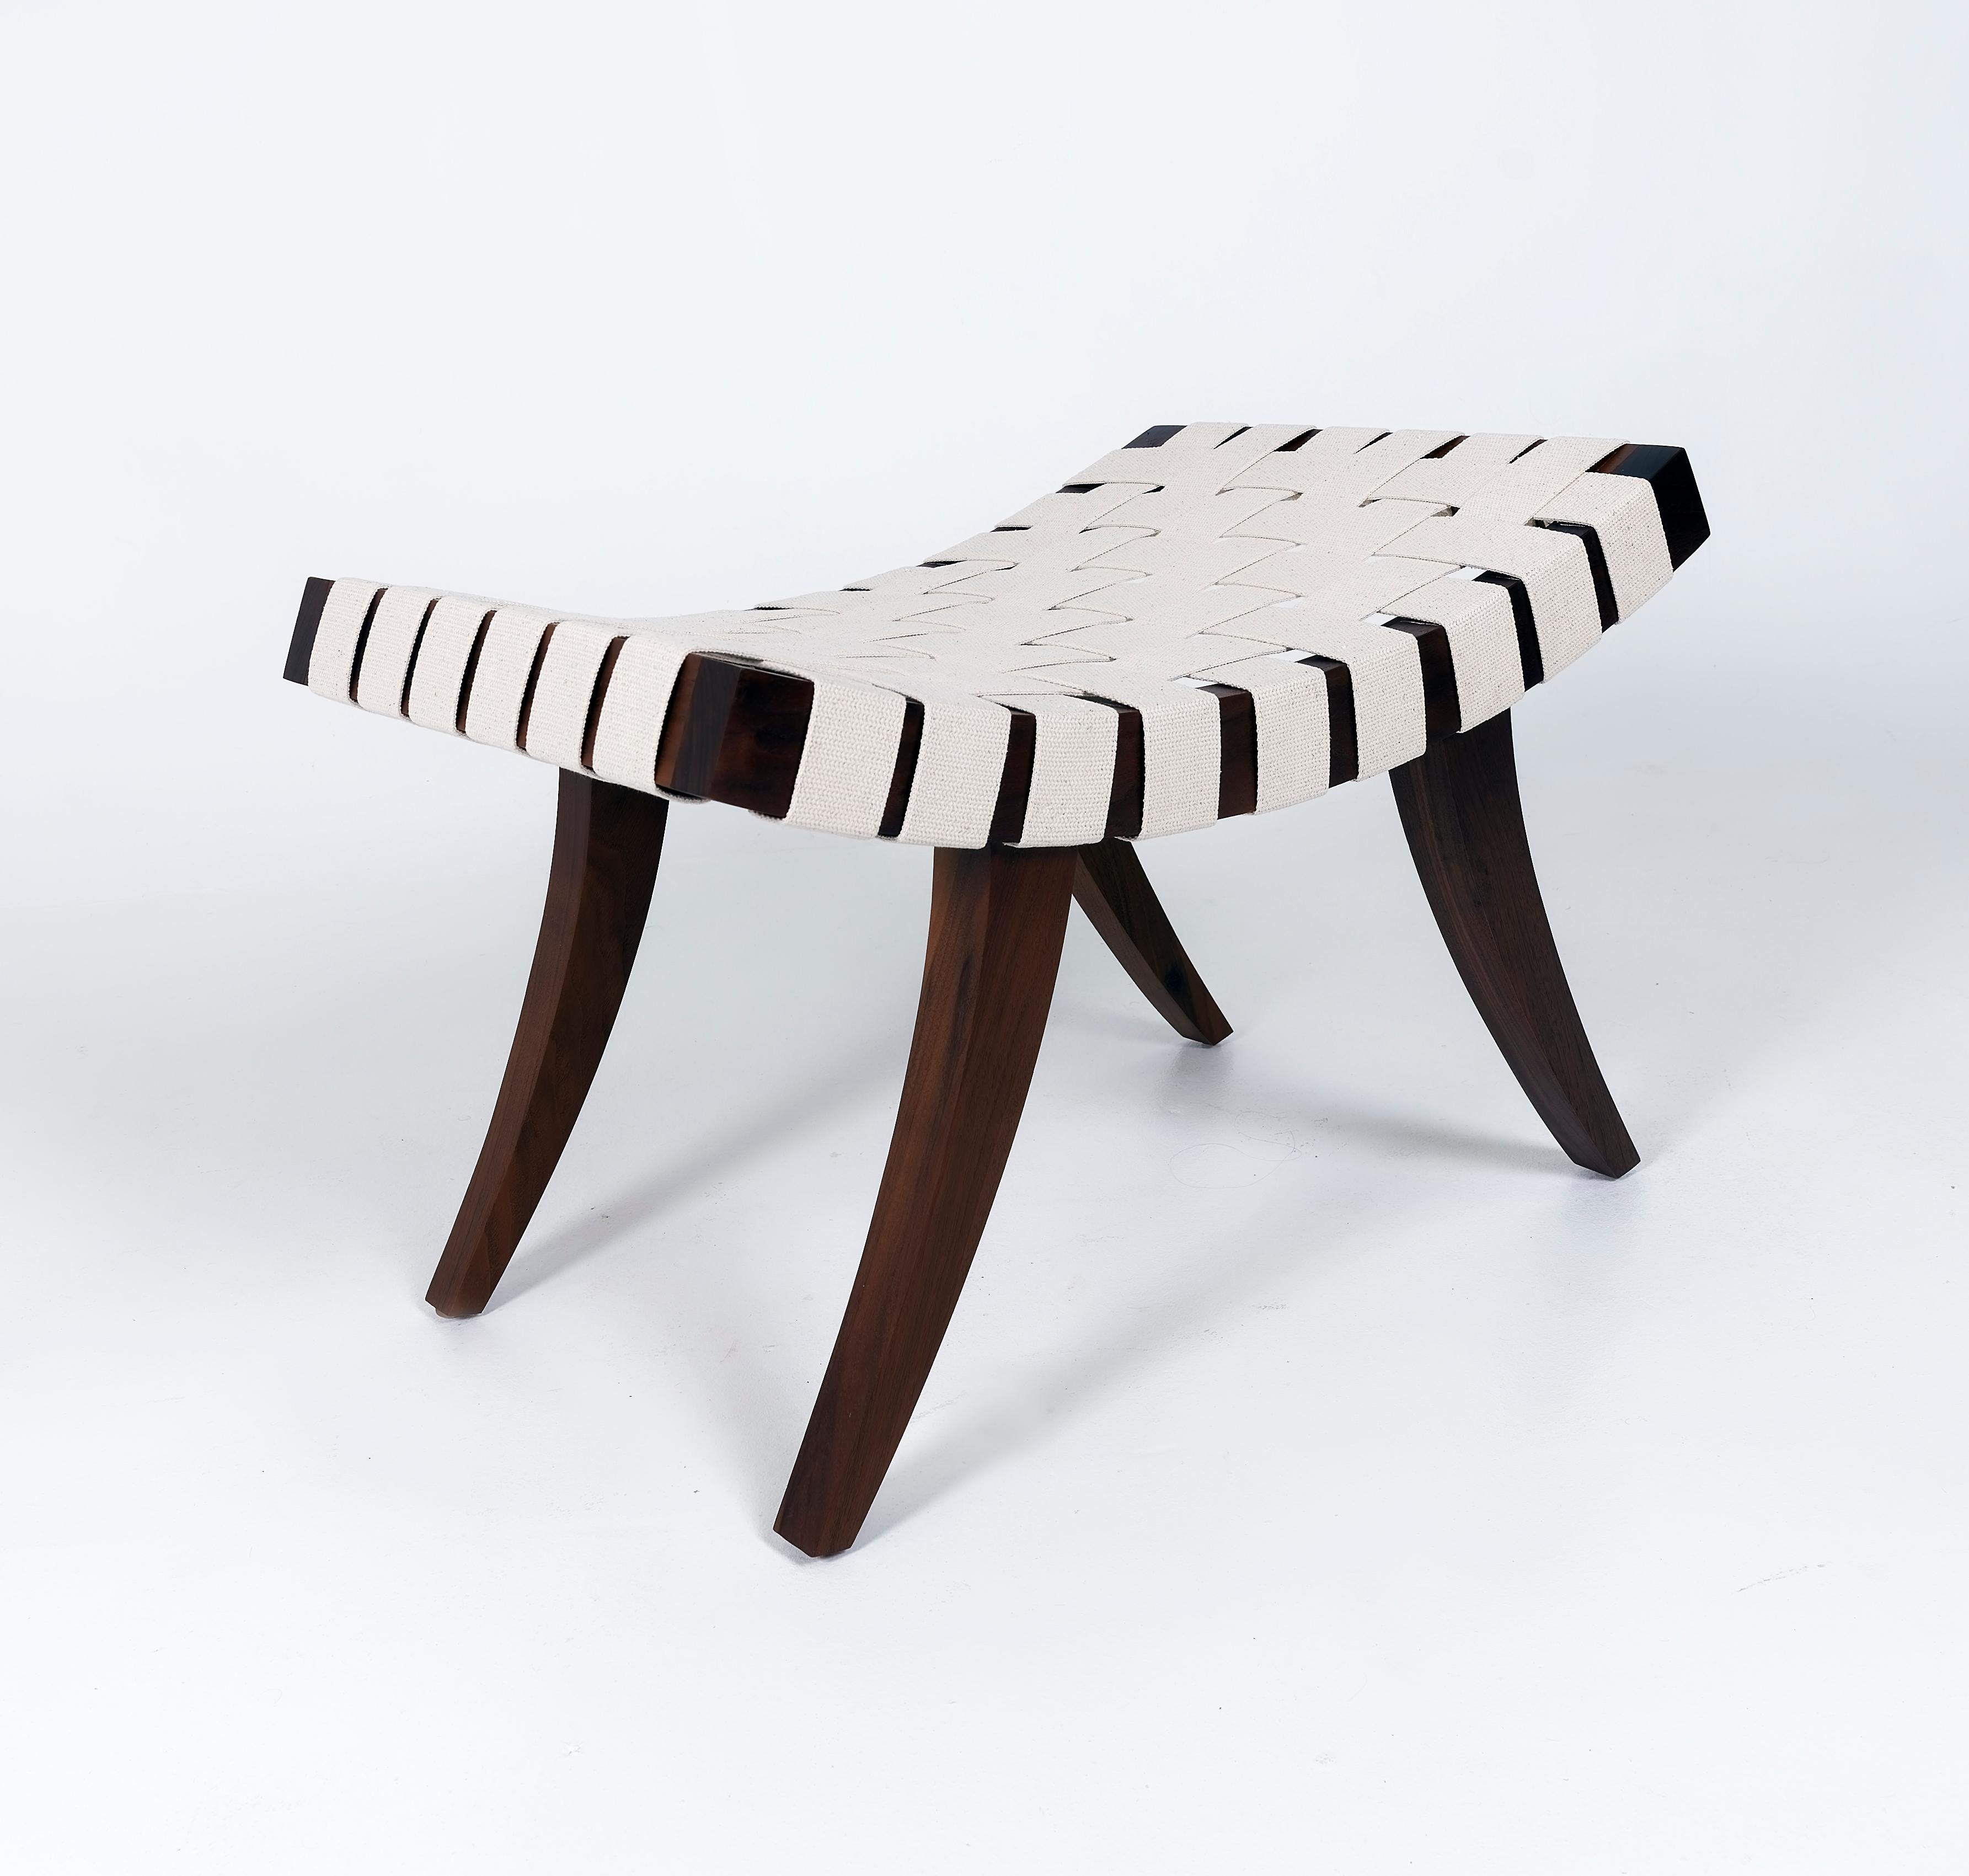 Adrian Ottoman designed by Dosbananos and made in Miami. Solid Walnut and Ivory Cotton Webbing.